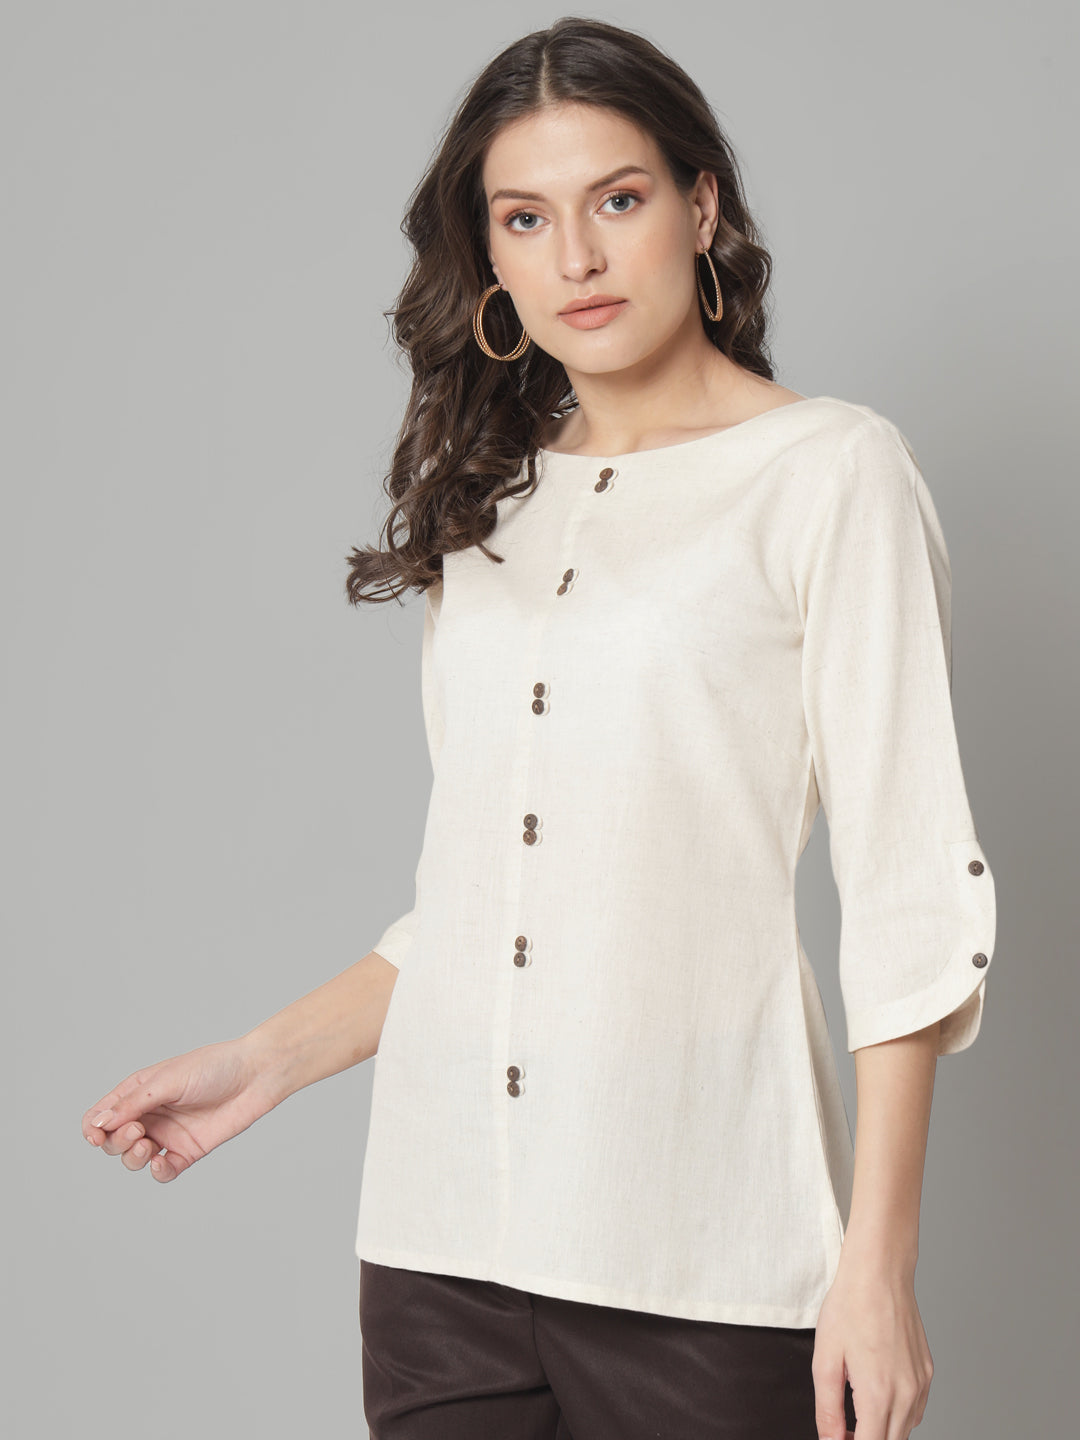 Loops and Button Detailed Top- Beige